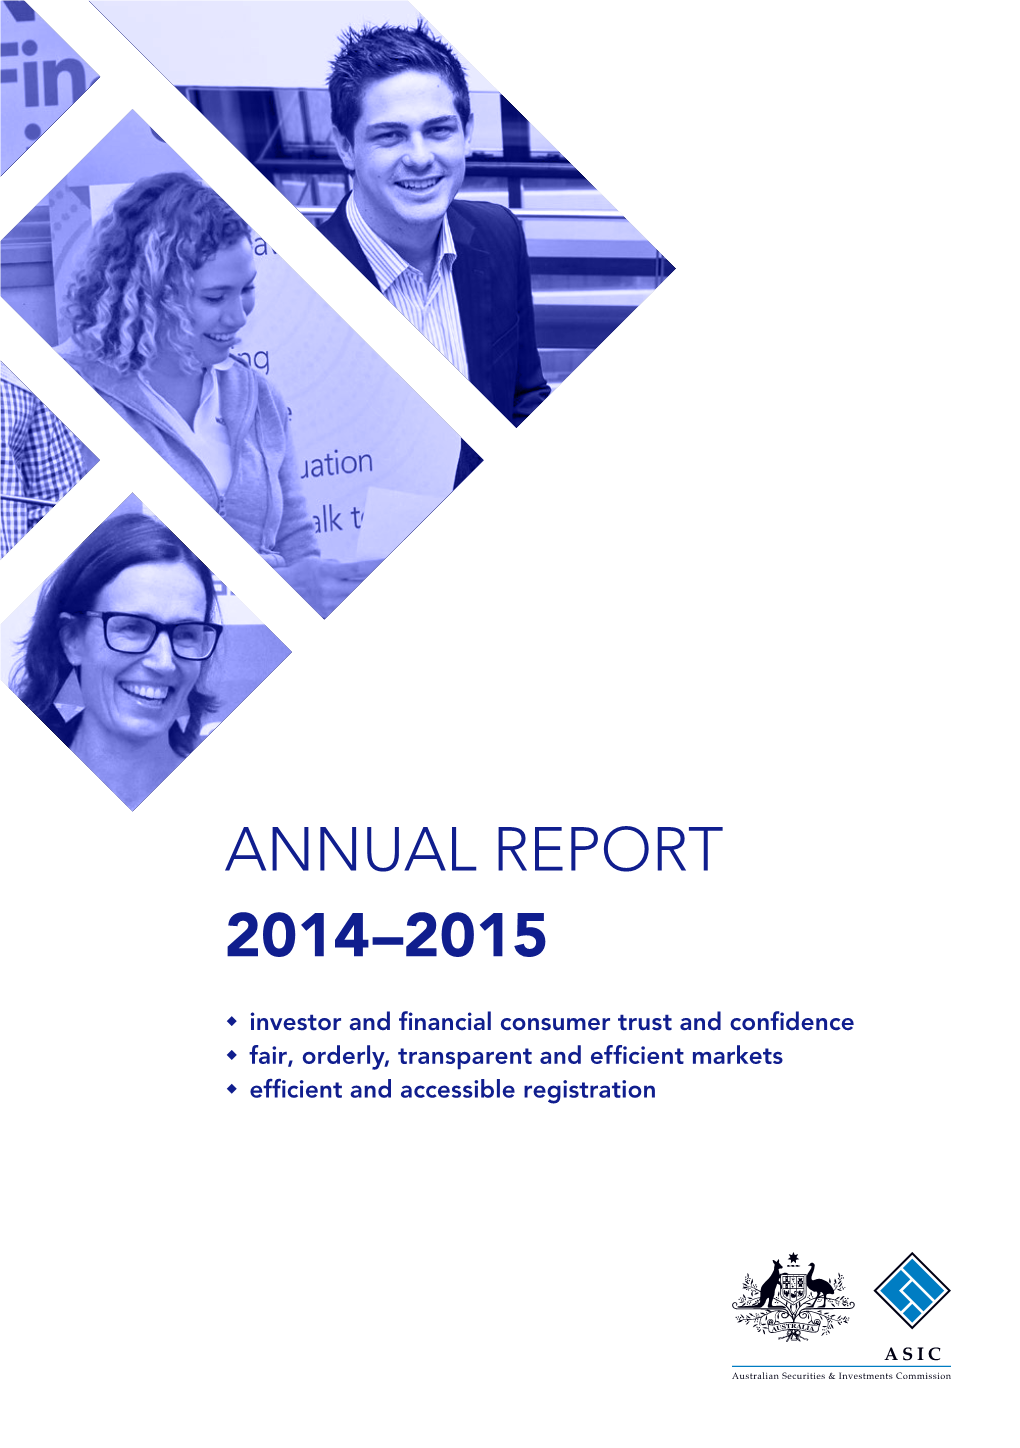 ASIC Annual Report 2014-2015